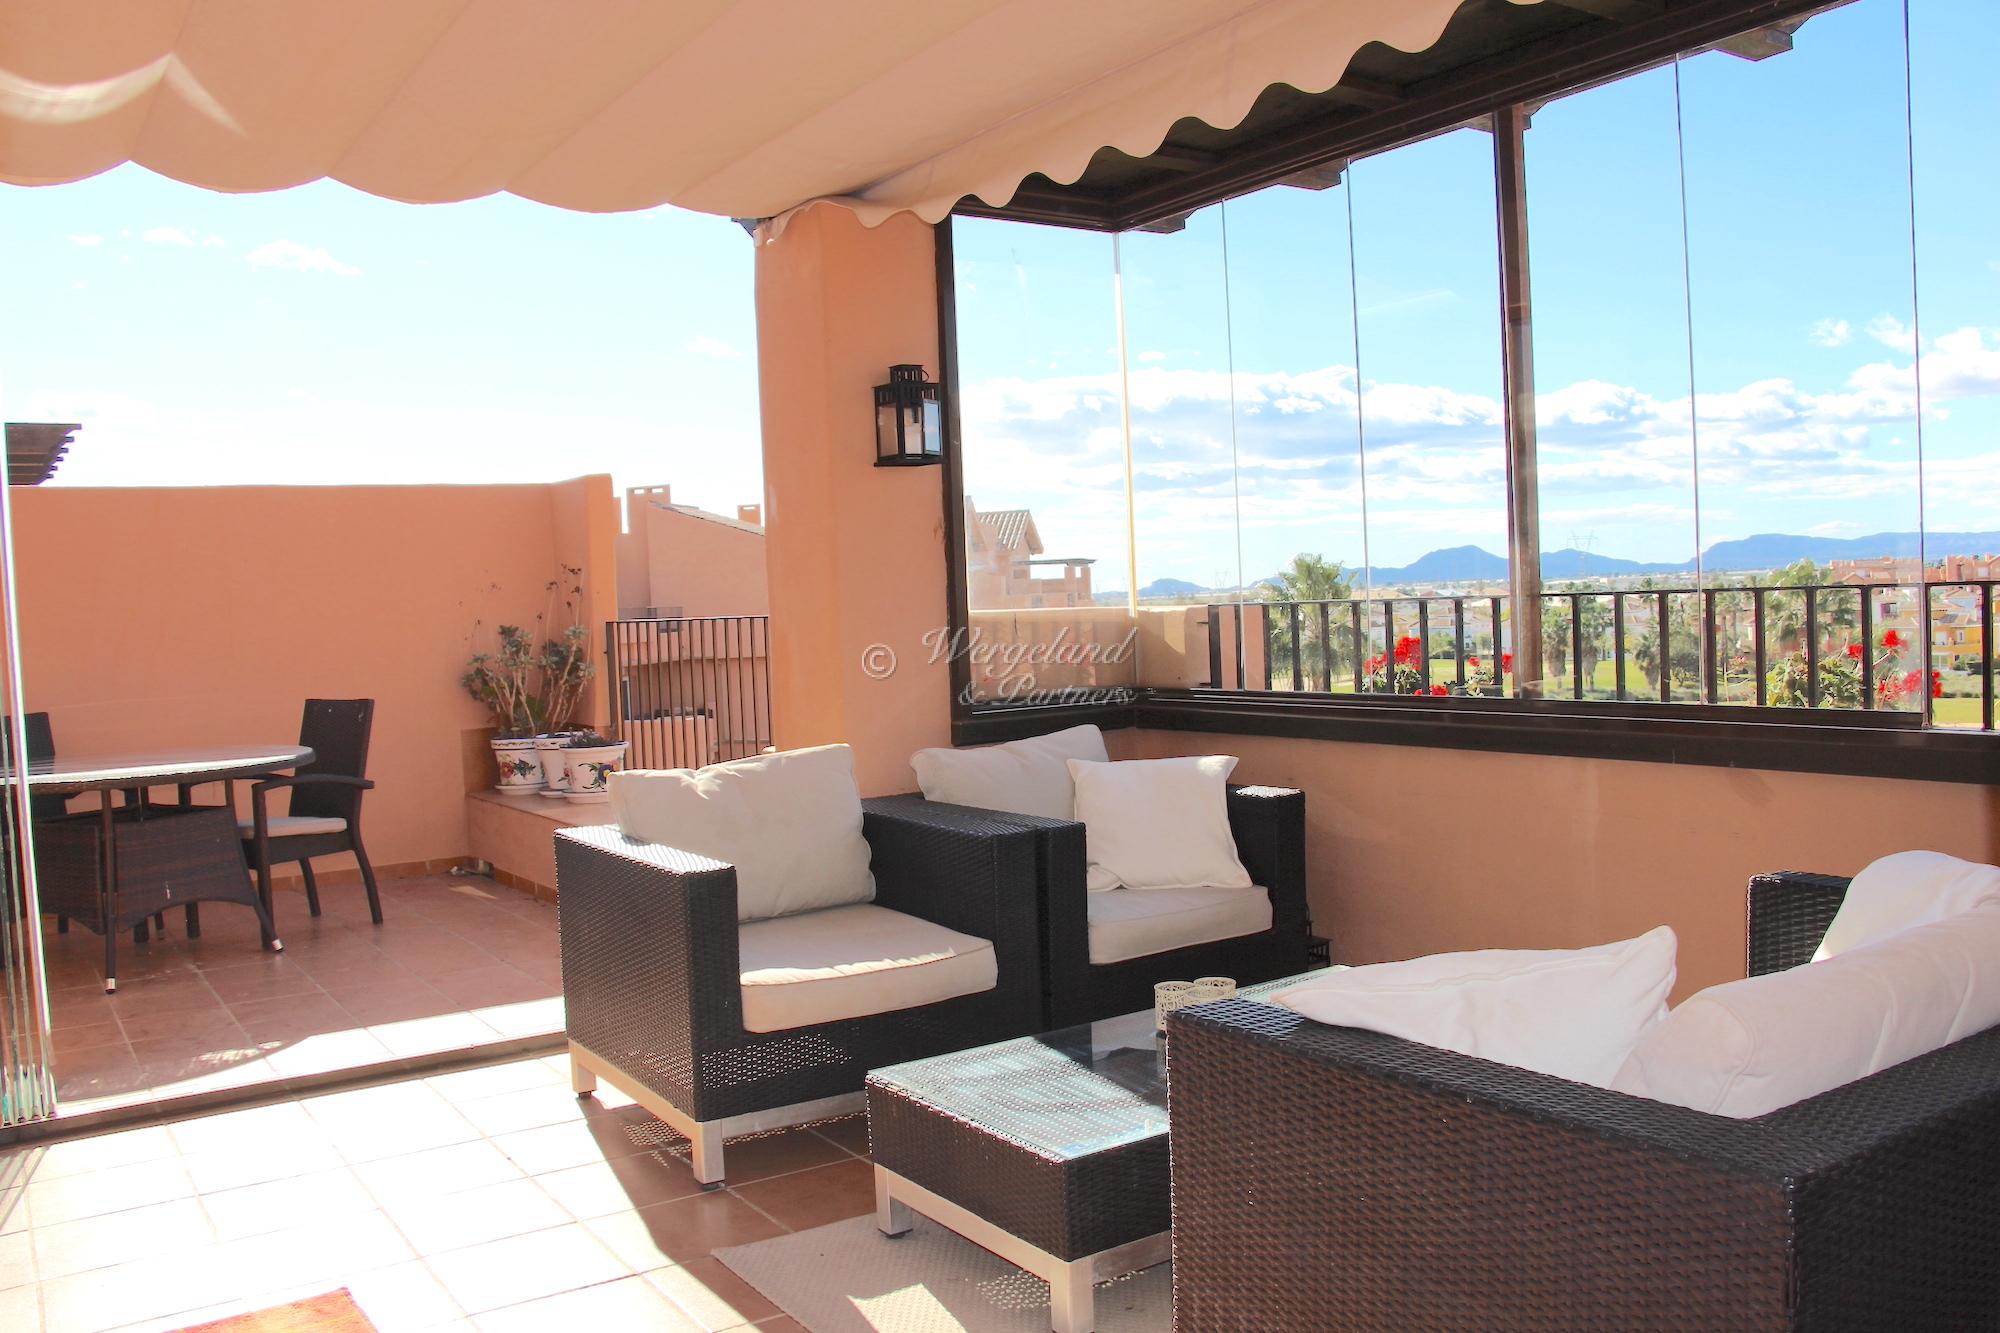 2 Bedroom furnished Penthouse with 70 m2 large terraces. 10 year golf membership (family) on 6 courses included [13731]